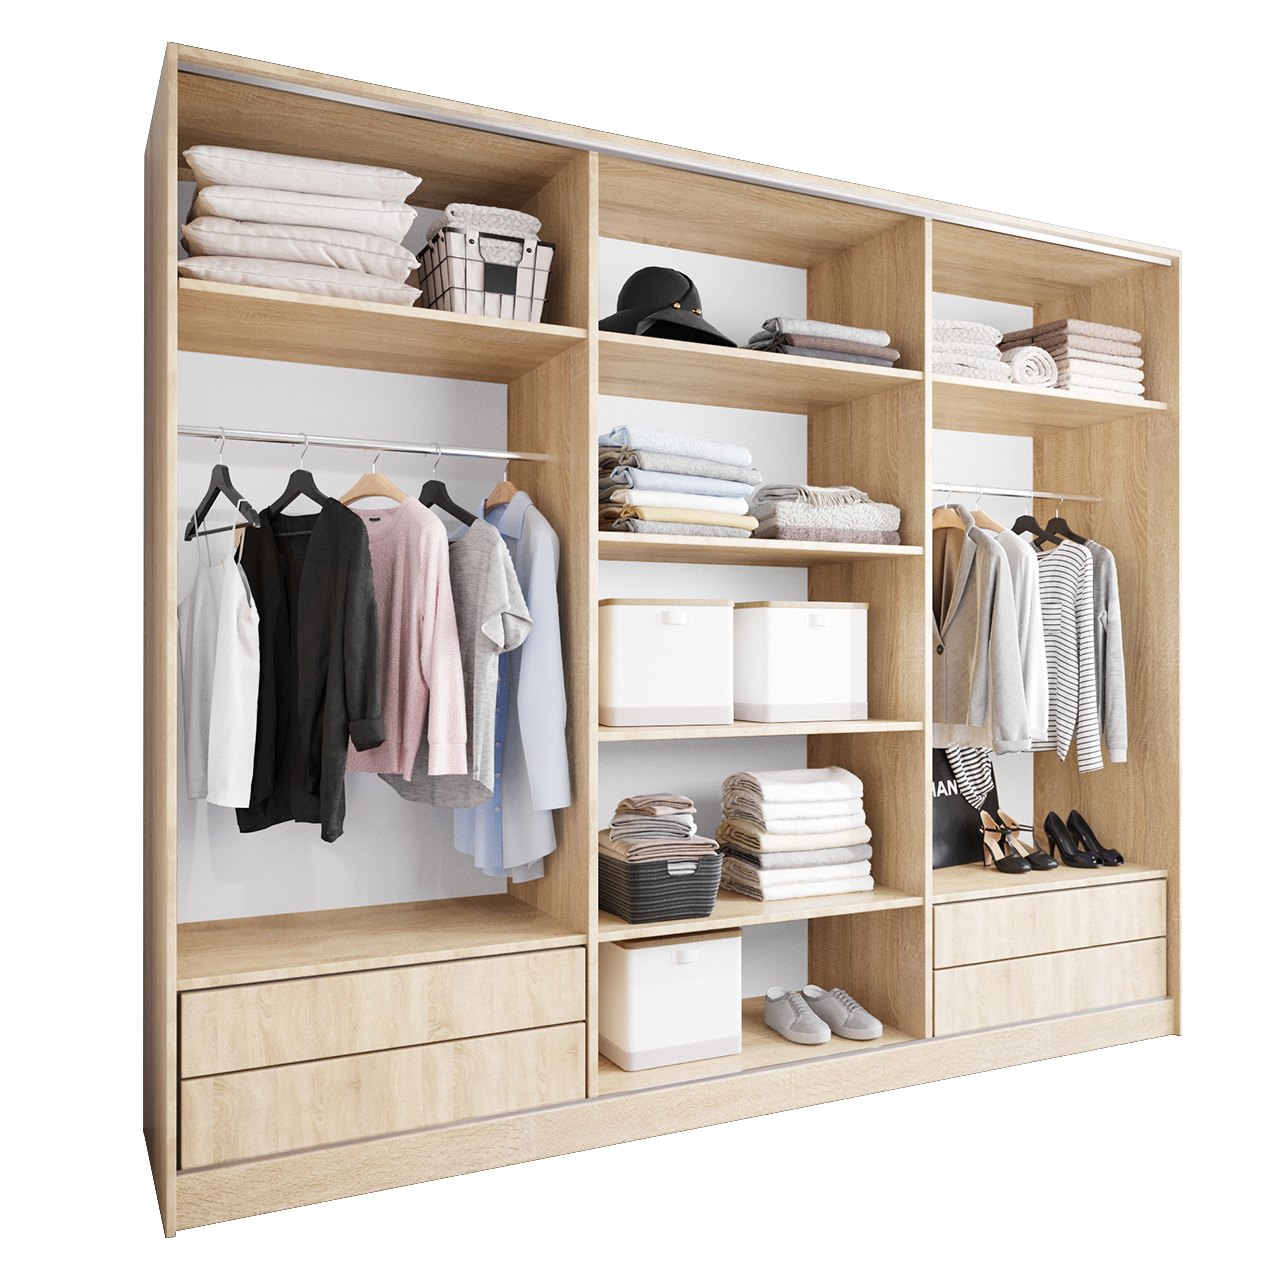 Sliding Wardrobe with Drawers BRITTO D 270 sonoma